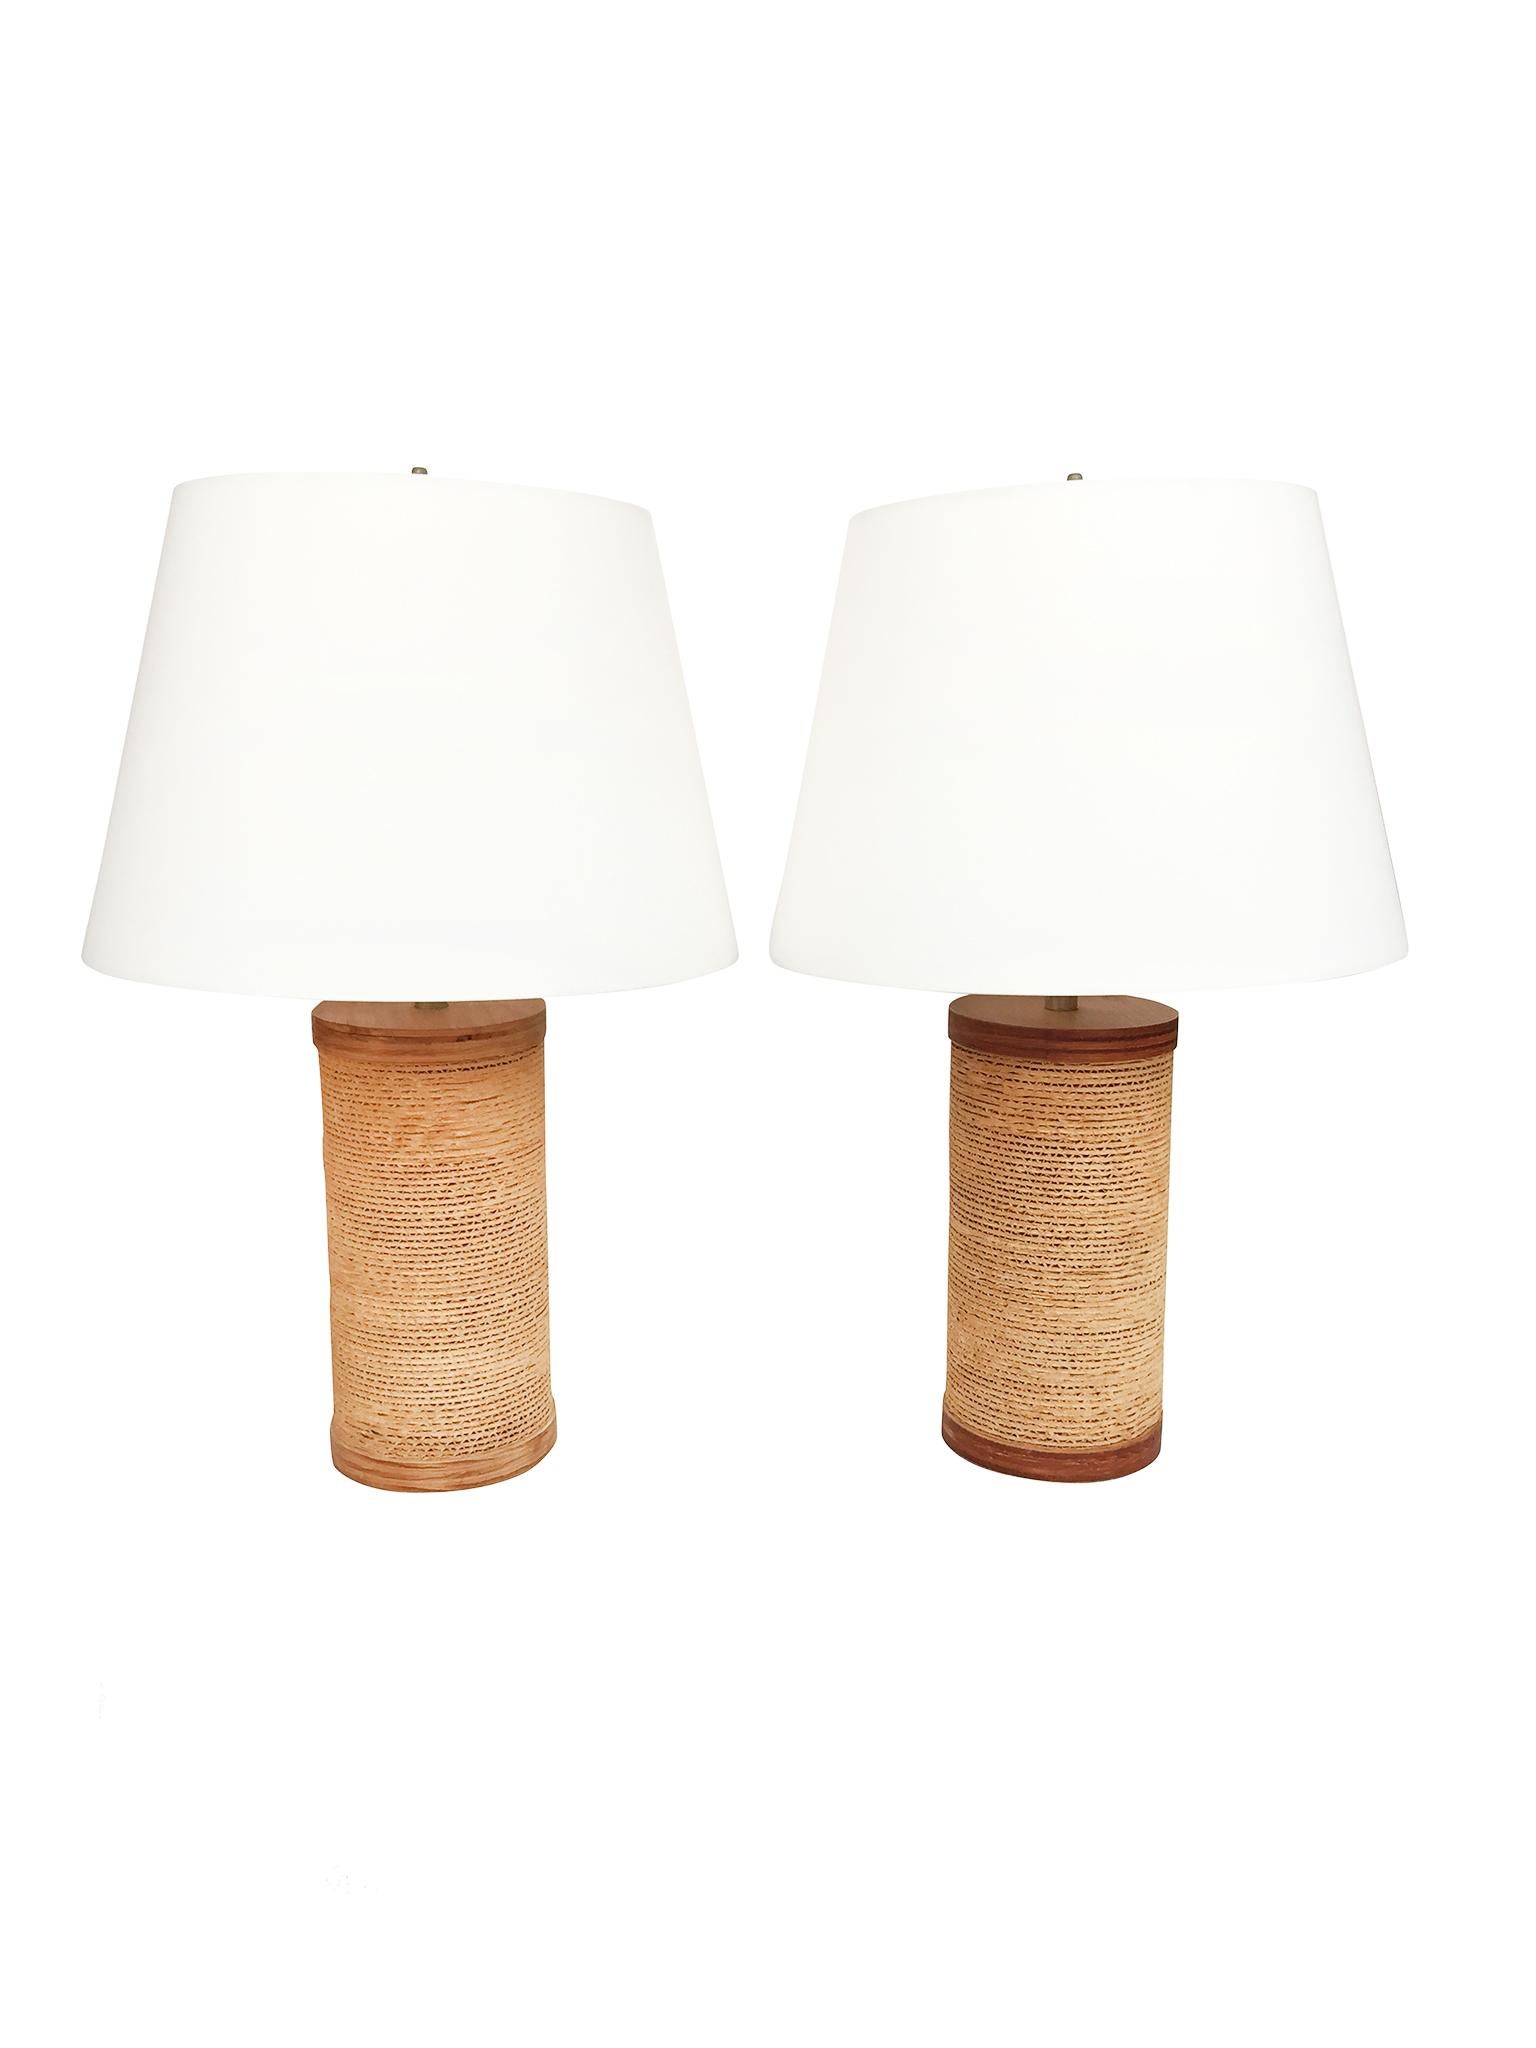 These whimsically and handsomely designed table lamps are by Gregory Van Pelt, who first designed them in the late 1960s, though it is often misattributed to Frank Gehry. The lamps are comprised of corrugated cardboard cut sleekly into a cylindrical